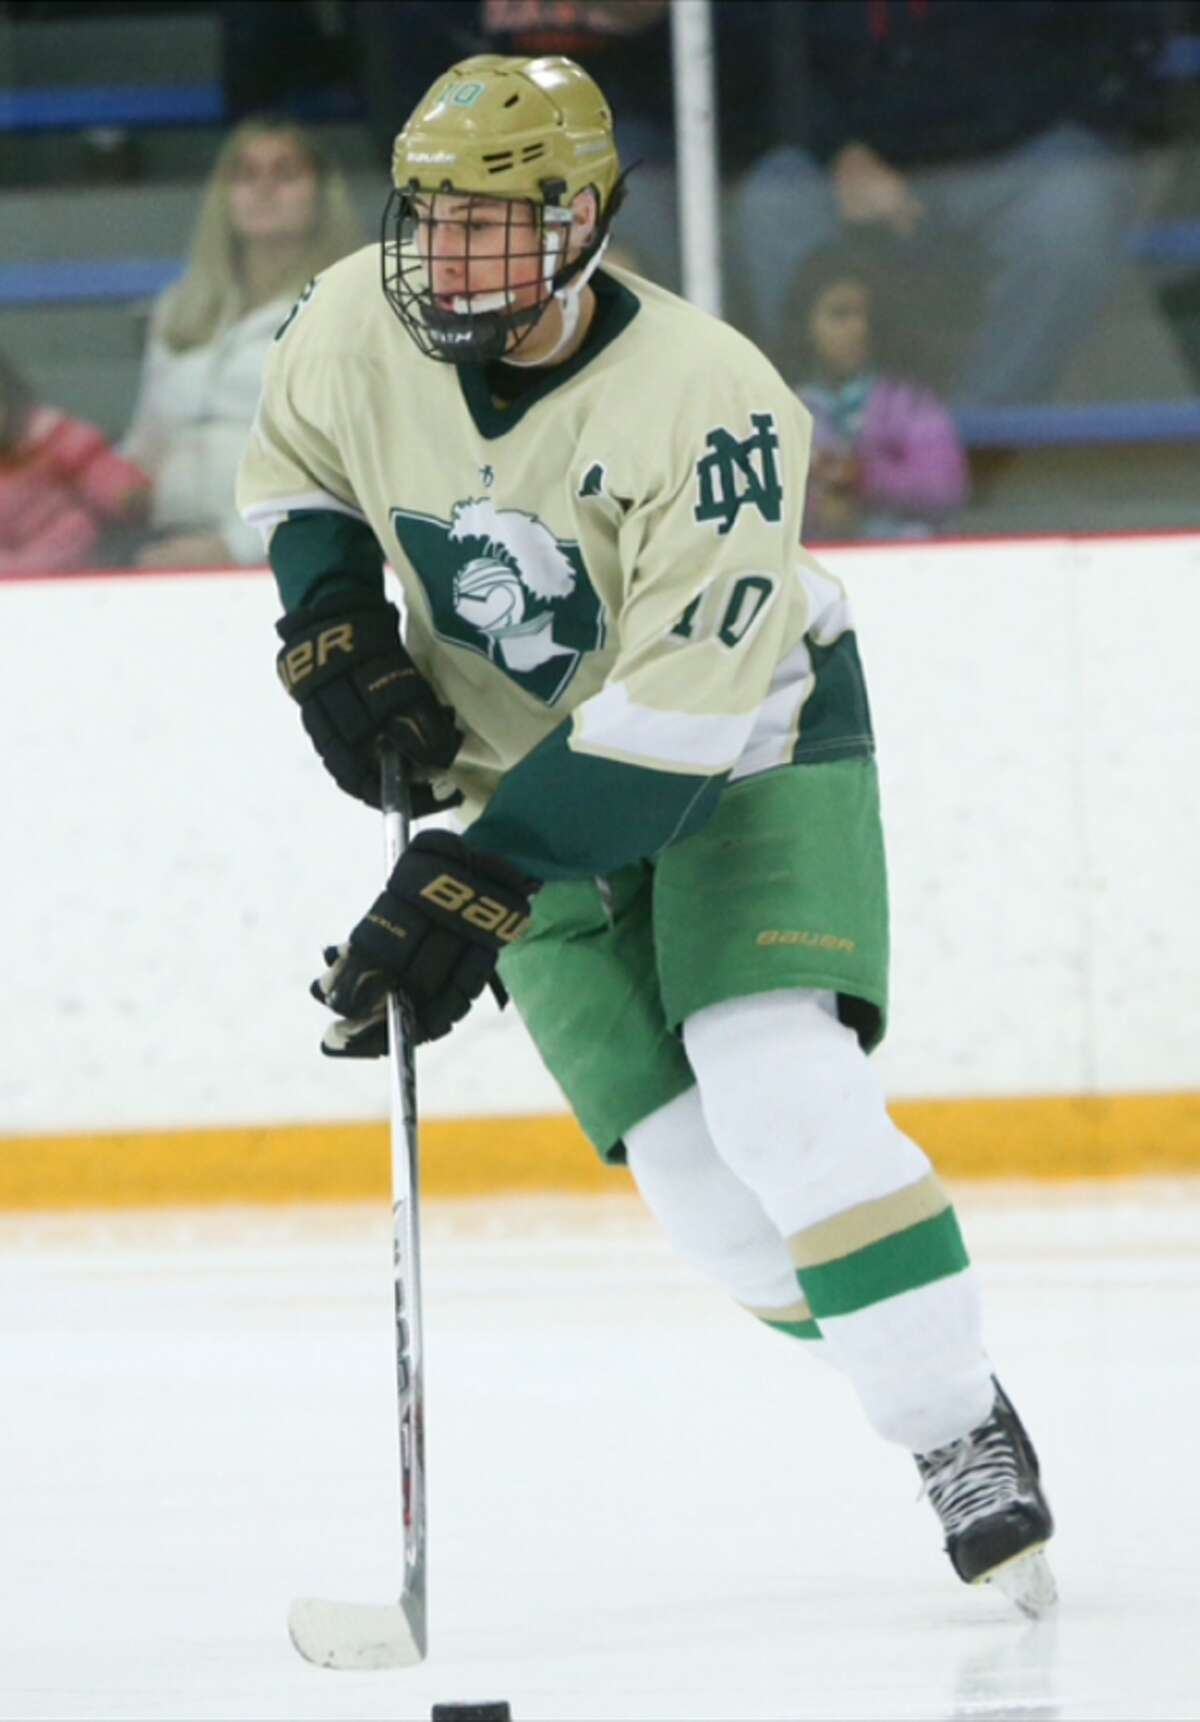 Photo — Notre Dame-West Haven. Notre Dame-West Haven defenseman Doug Caliendo scored the deciding goal 25 seconds into overtime in Notre Dame’s 3-2 win over Northwest Catholic Wednesday. Doug’s father died of cancer Wednesday morning.